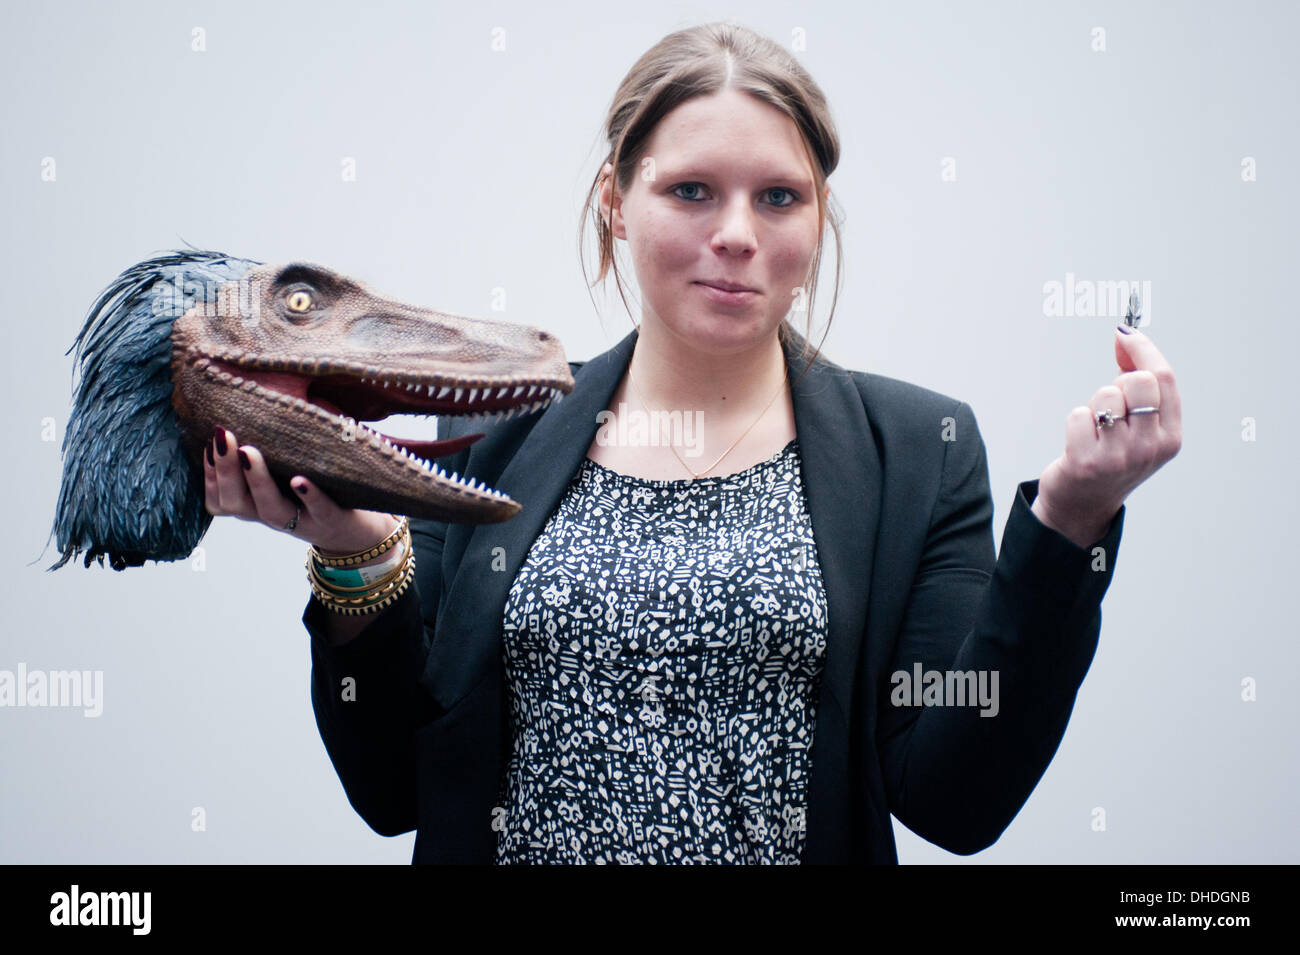 London, UK. 7th November 2013. Cyrielle Langiaux of Crea' Zaurus 3D shows a Velociraptor head, printed by Arketyp 3D, at the 3D Printshow at the Business Design Centre in London. Credit:  Piero Cruciatti/Alamy Live News Stock Photo